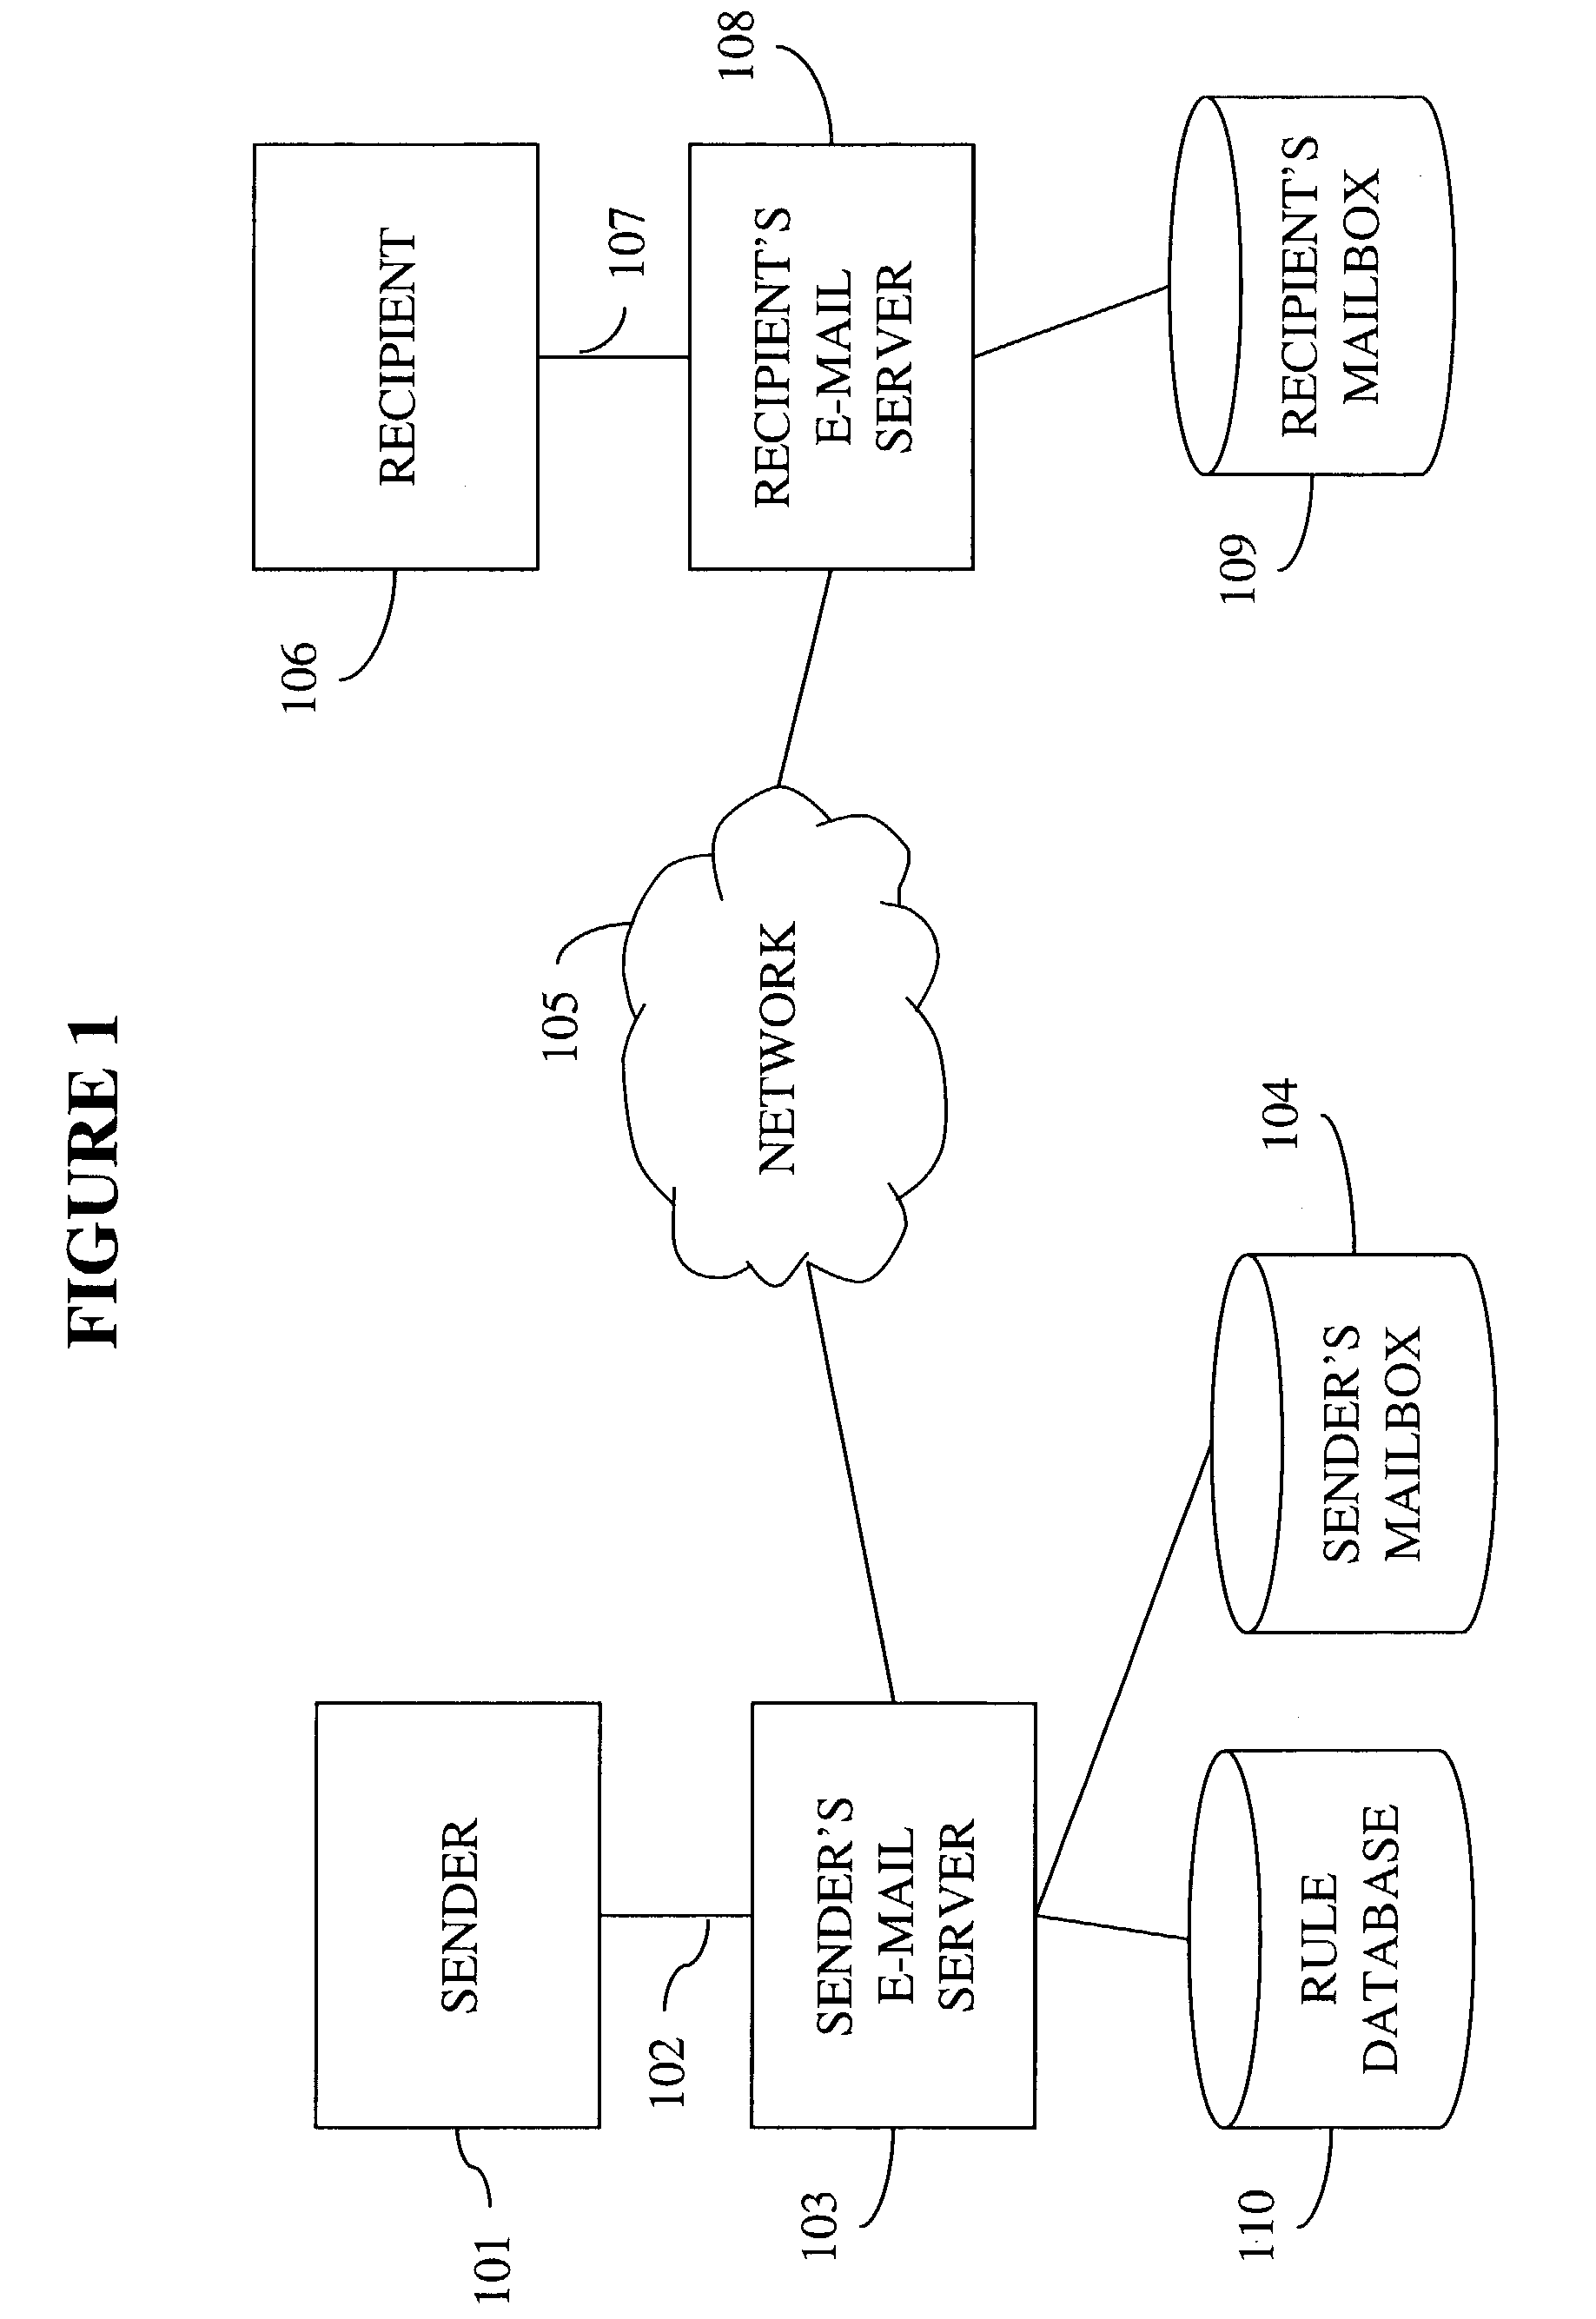 System, method, and computer program product for sending electronic messages based on time zone information of intended recipients